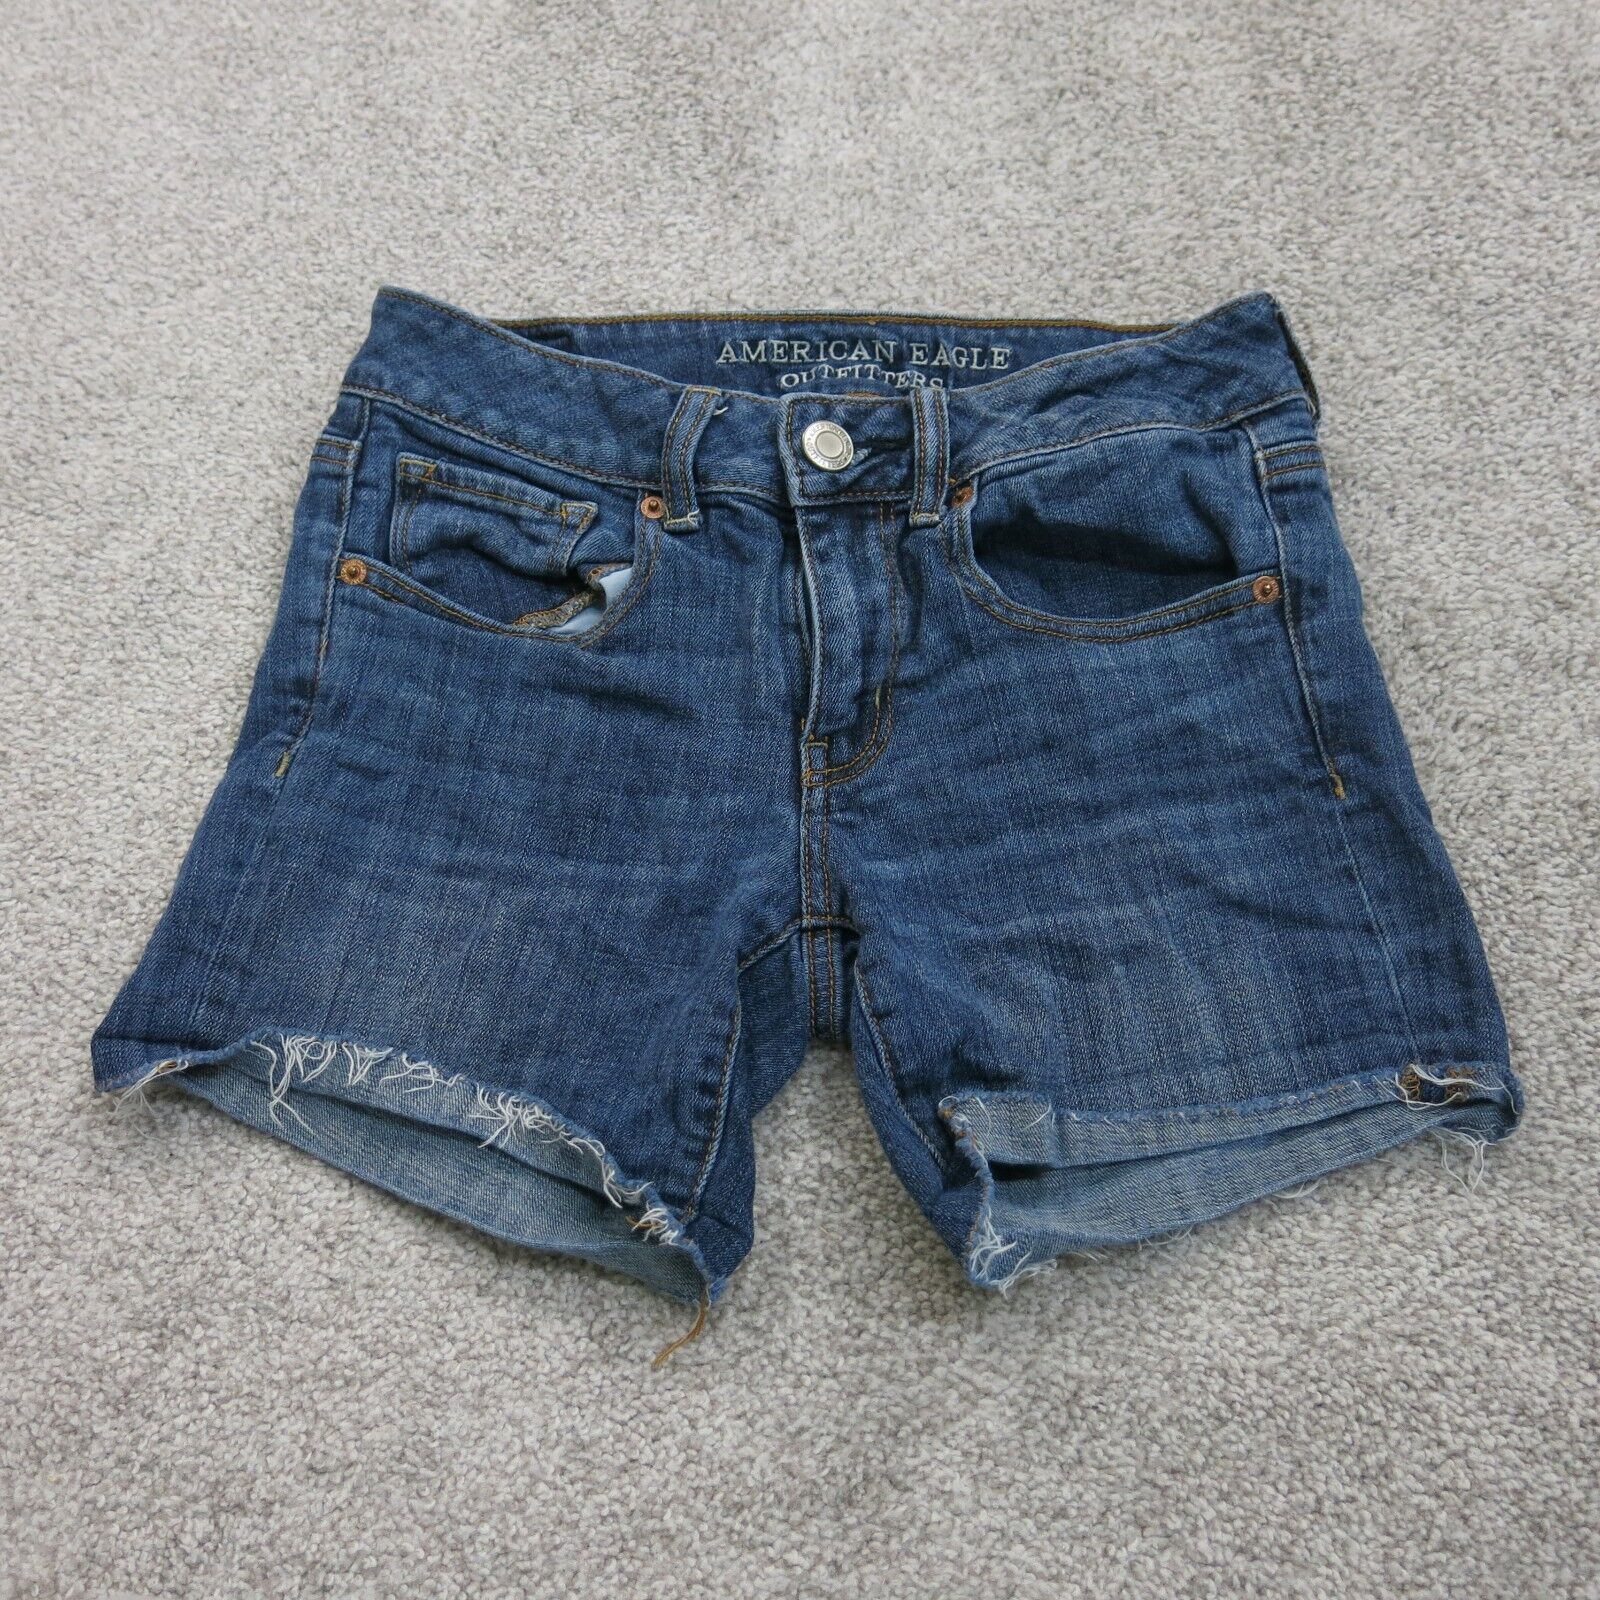 American Eagle Outfitters, Shorts, Short Jean Shorts American Eagle